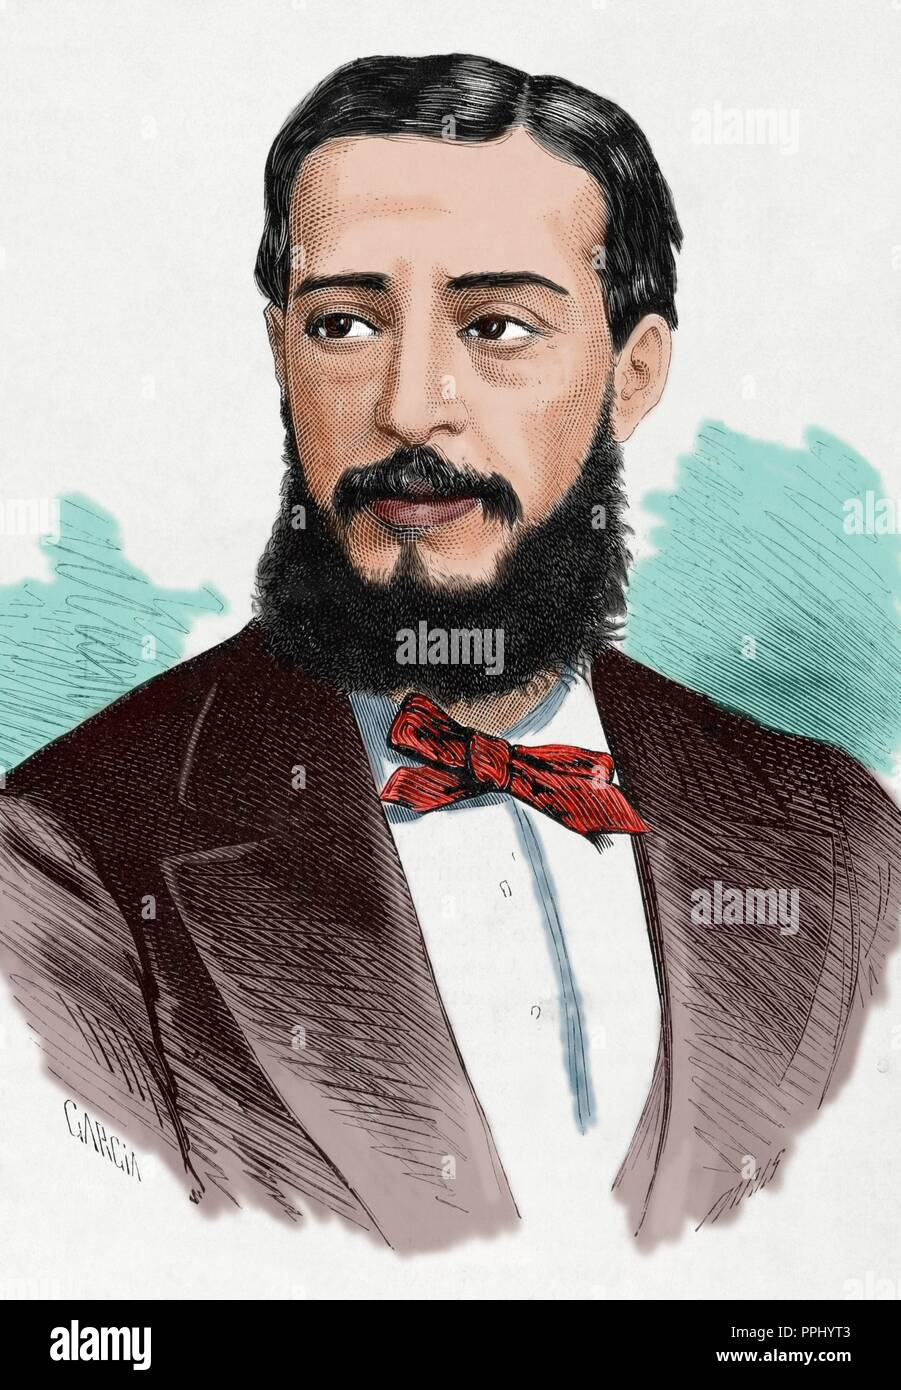 Angel Carvajal y Fernandez de Cordoba (1841-1898). Spanish politician. Engraving in The Spanish and American Illustration, 1872. Colored. Stock Photo